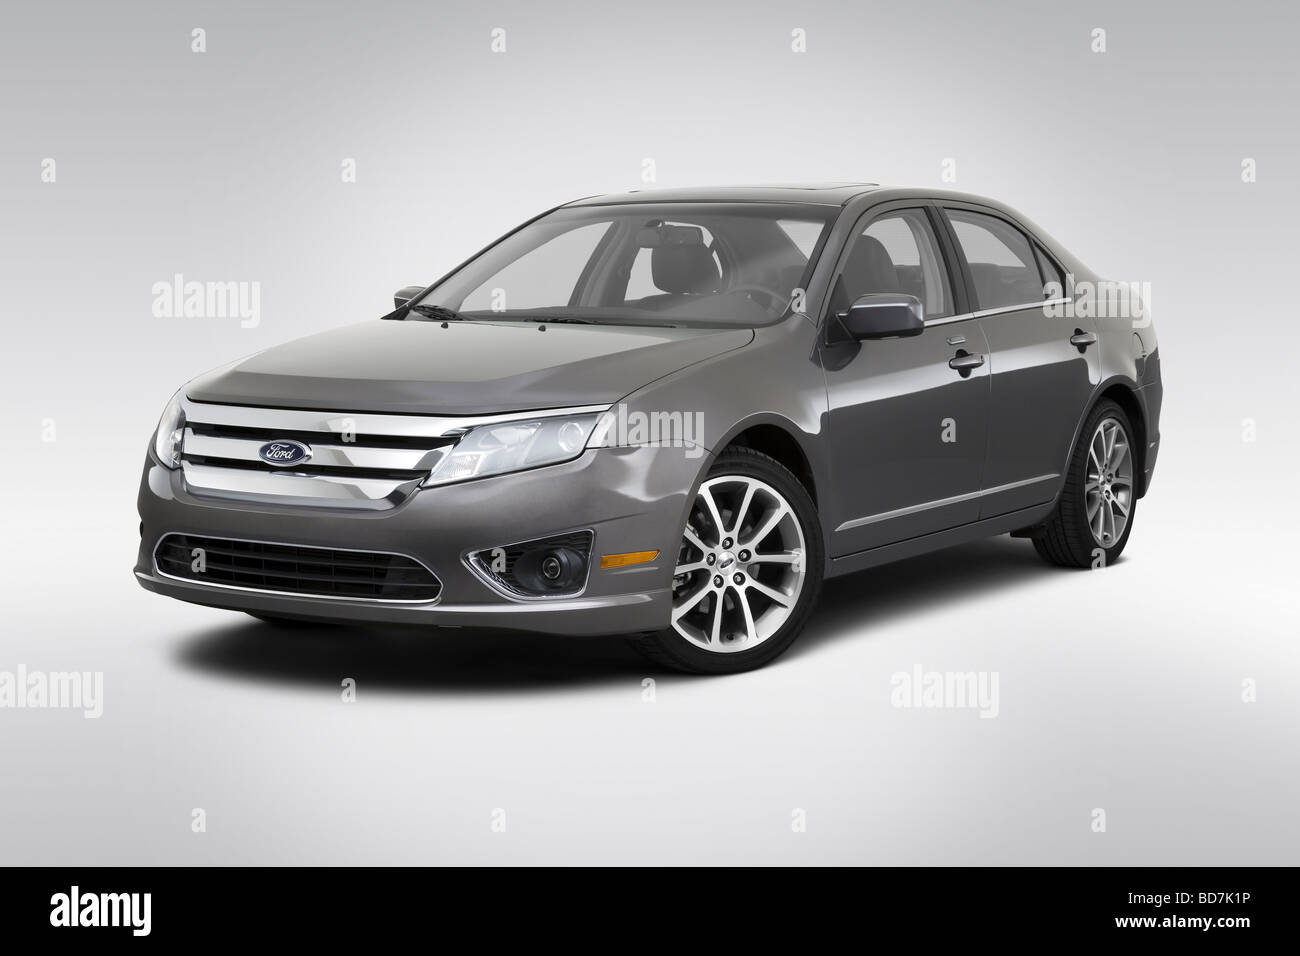 2010 Ford Fusion SEL in Gray - Front angle view Stock Photo